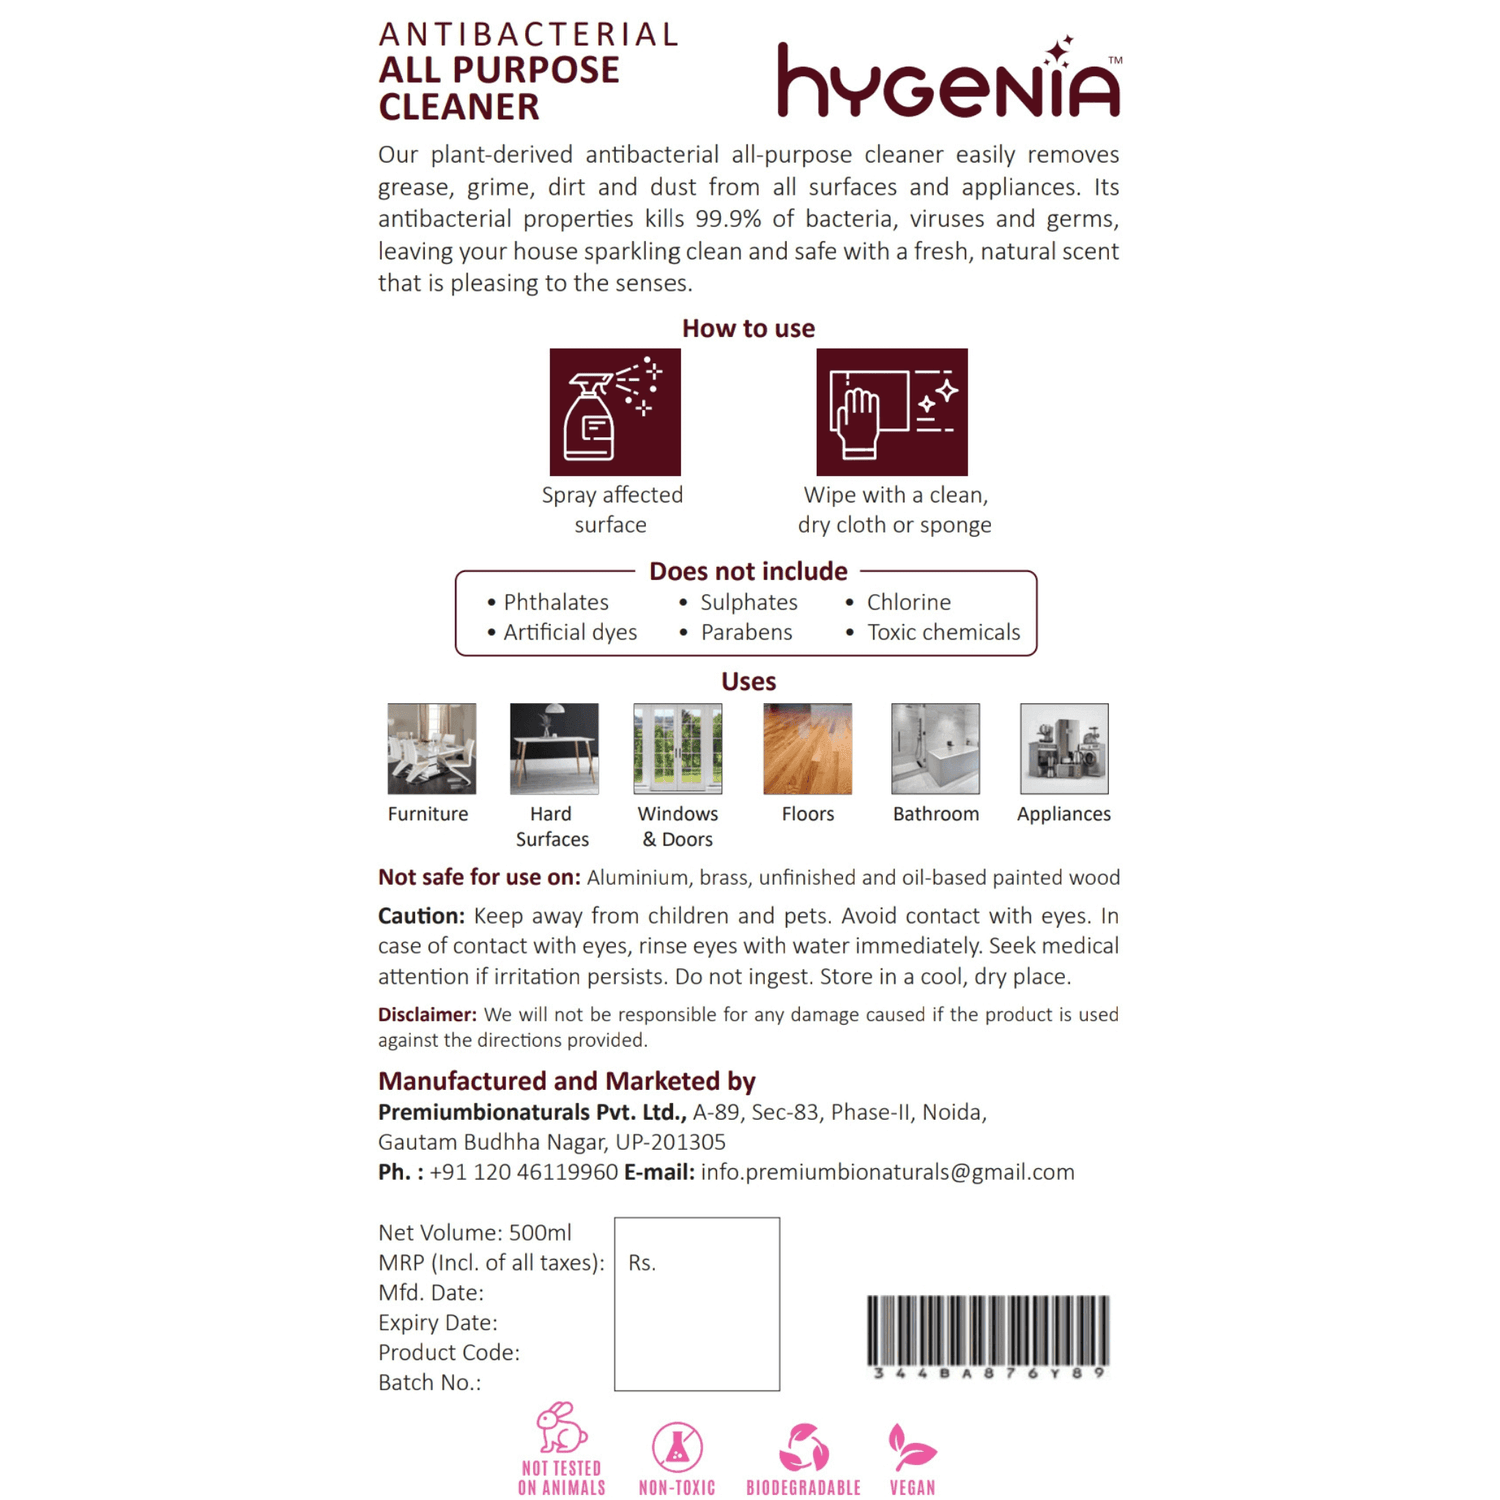 Hygenia all purpose surface cleaners are safe to use on appliances and naturally gets rid of tough stains and grease.